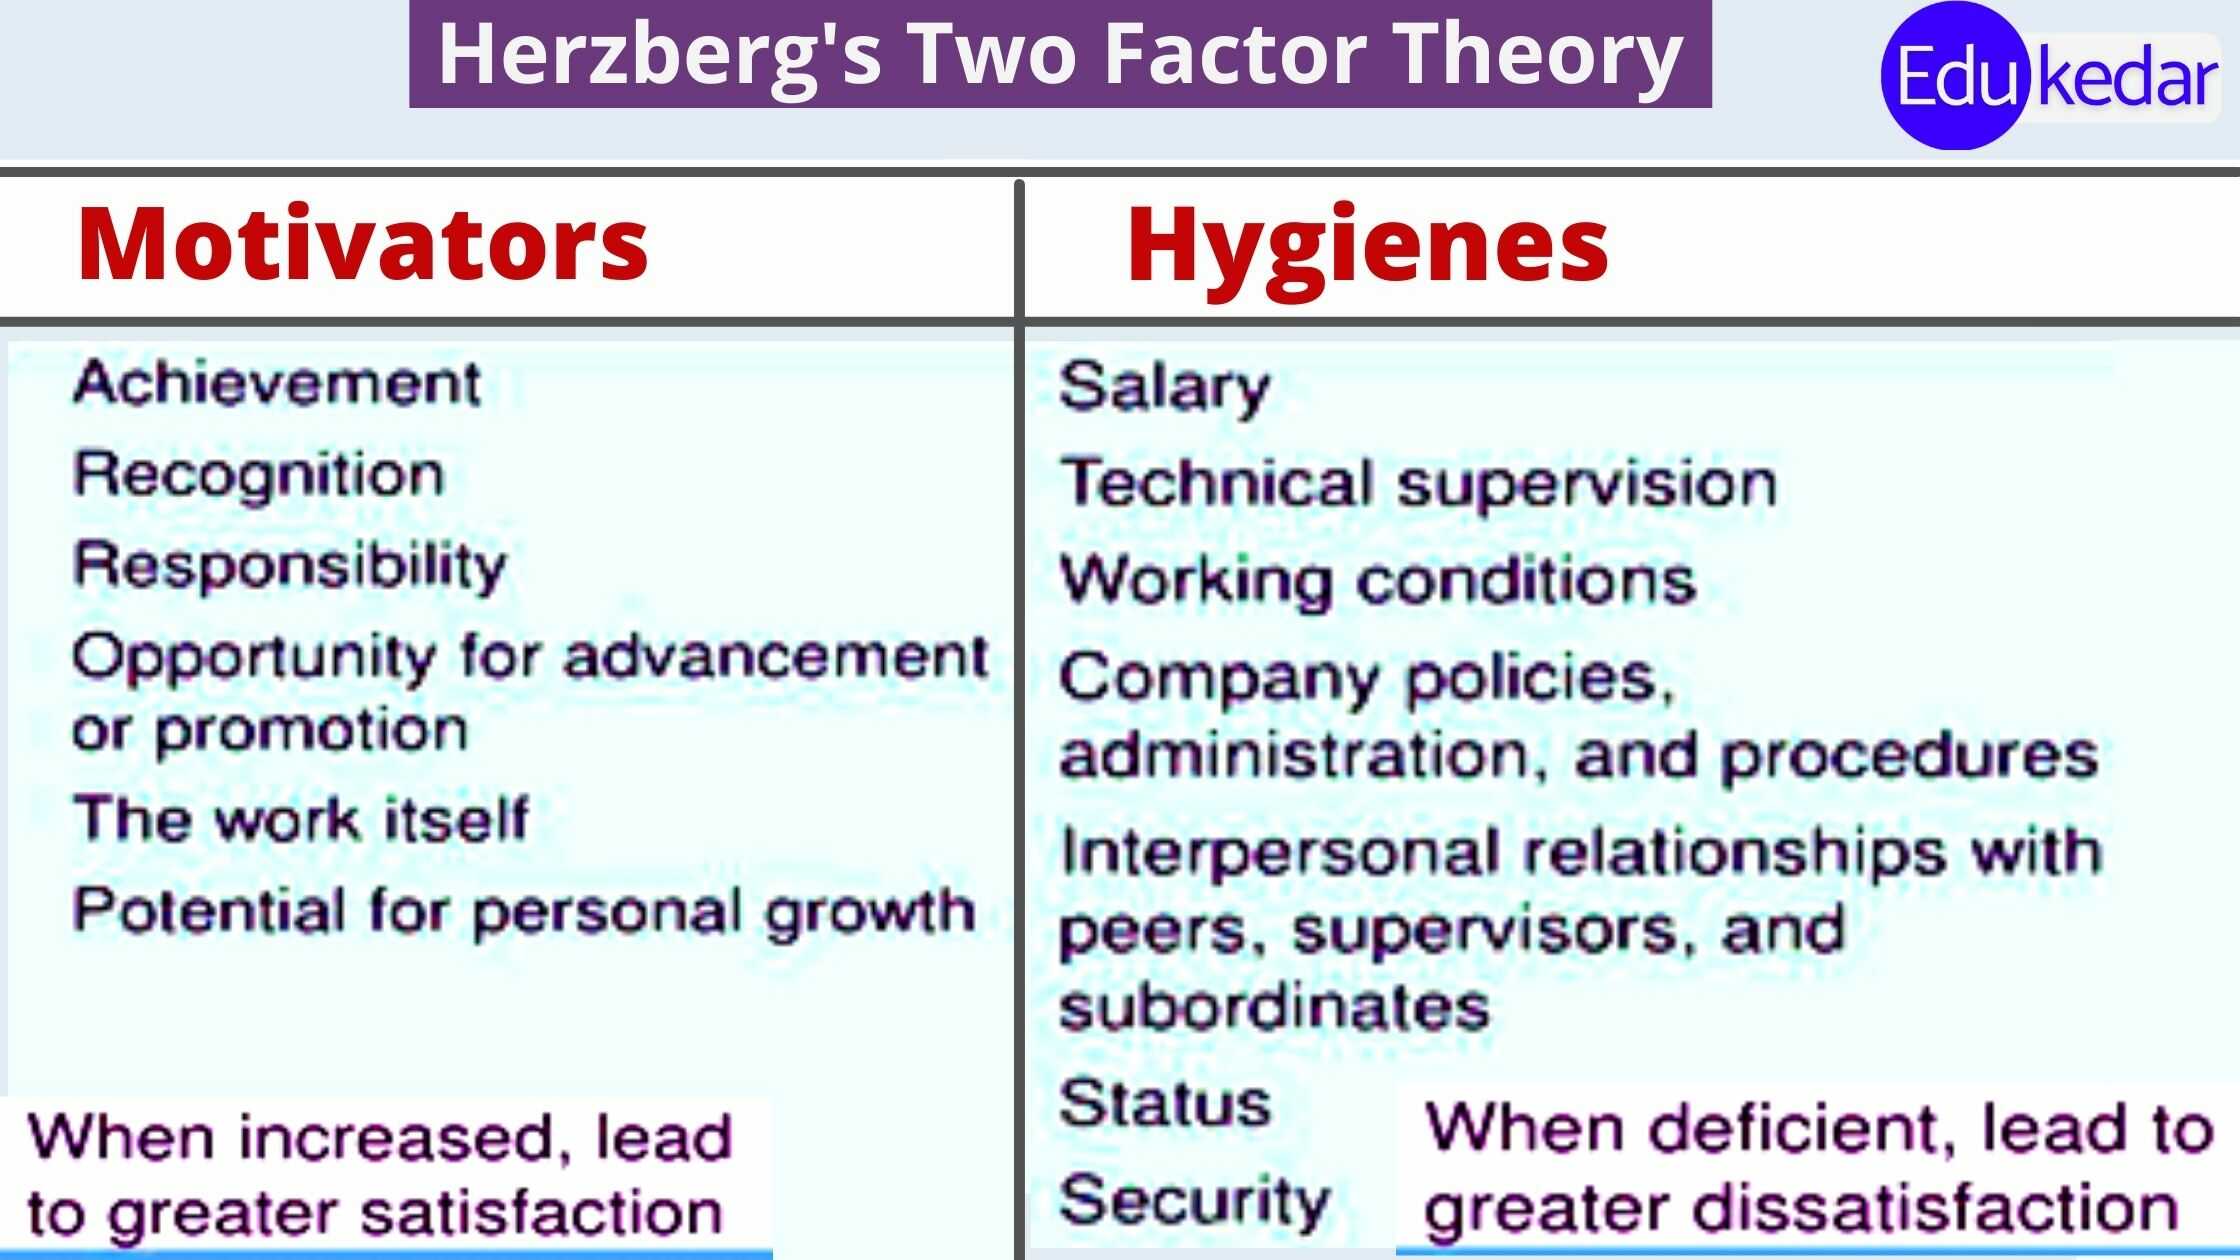 herzberg theory x and y